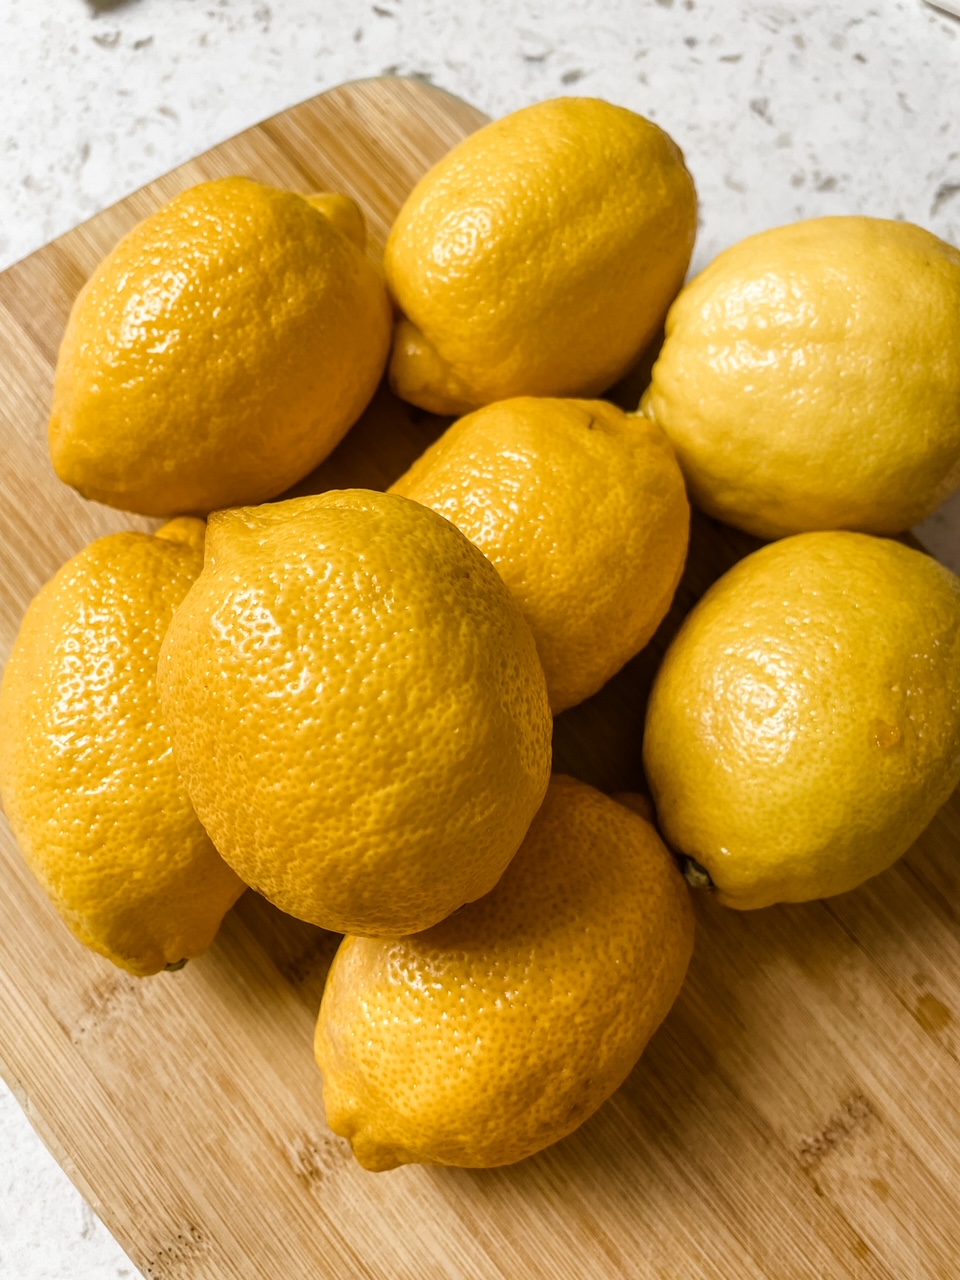 A pile of lemons on top of a wooden cutting board